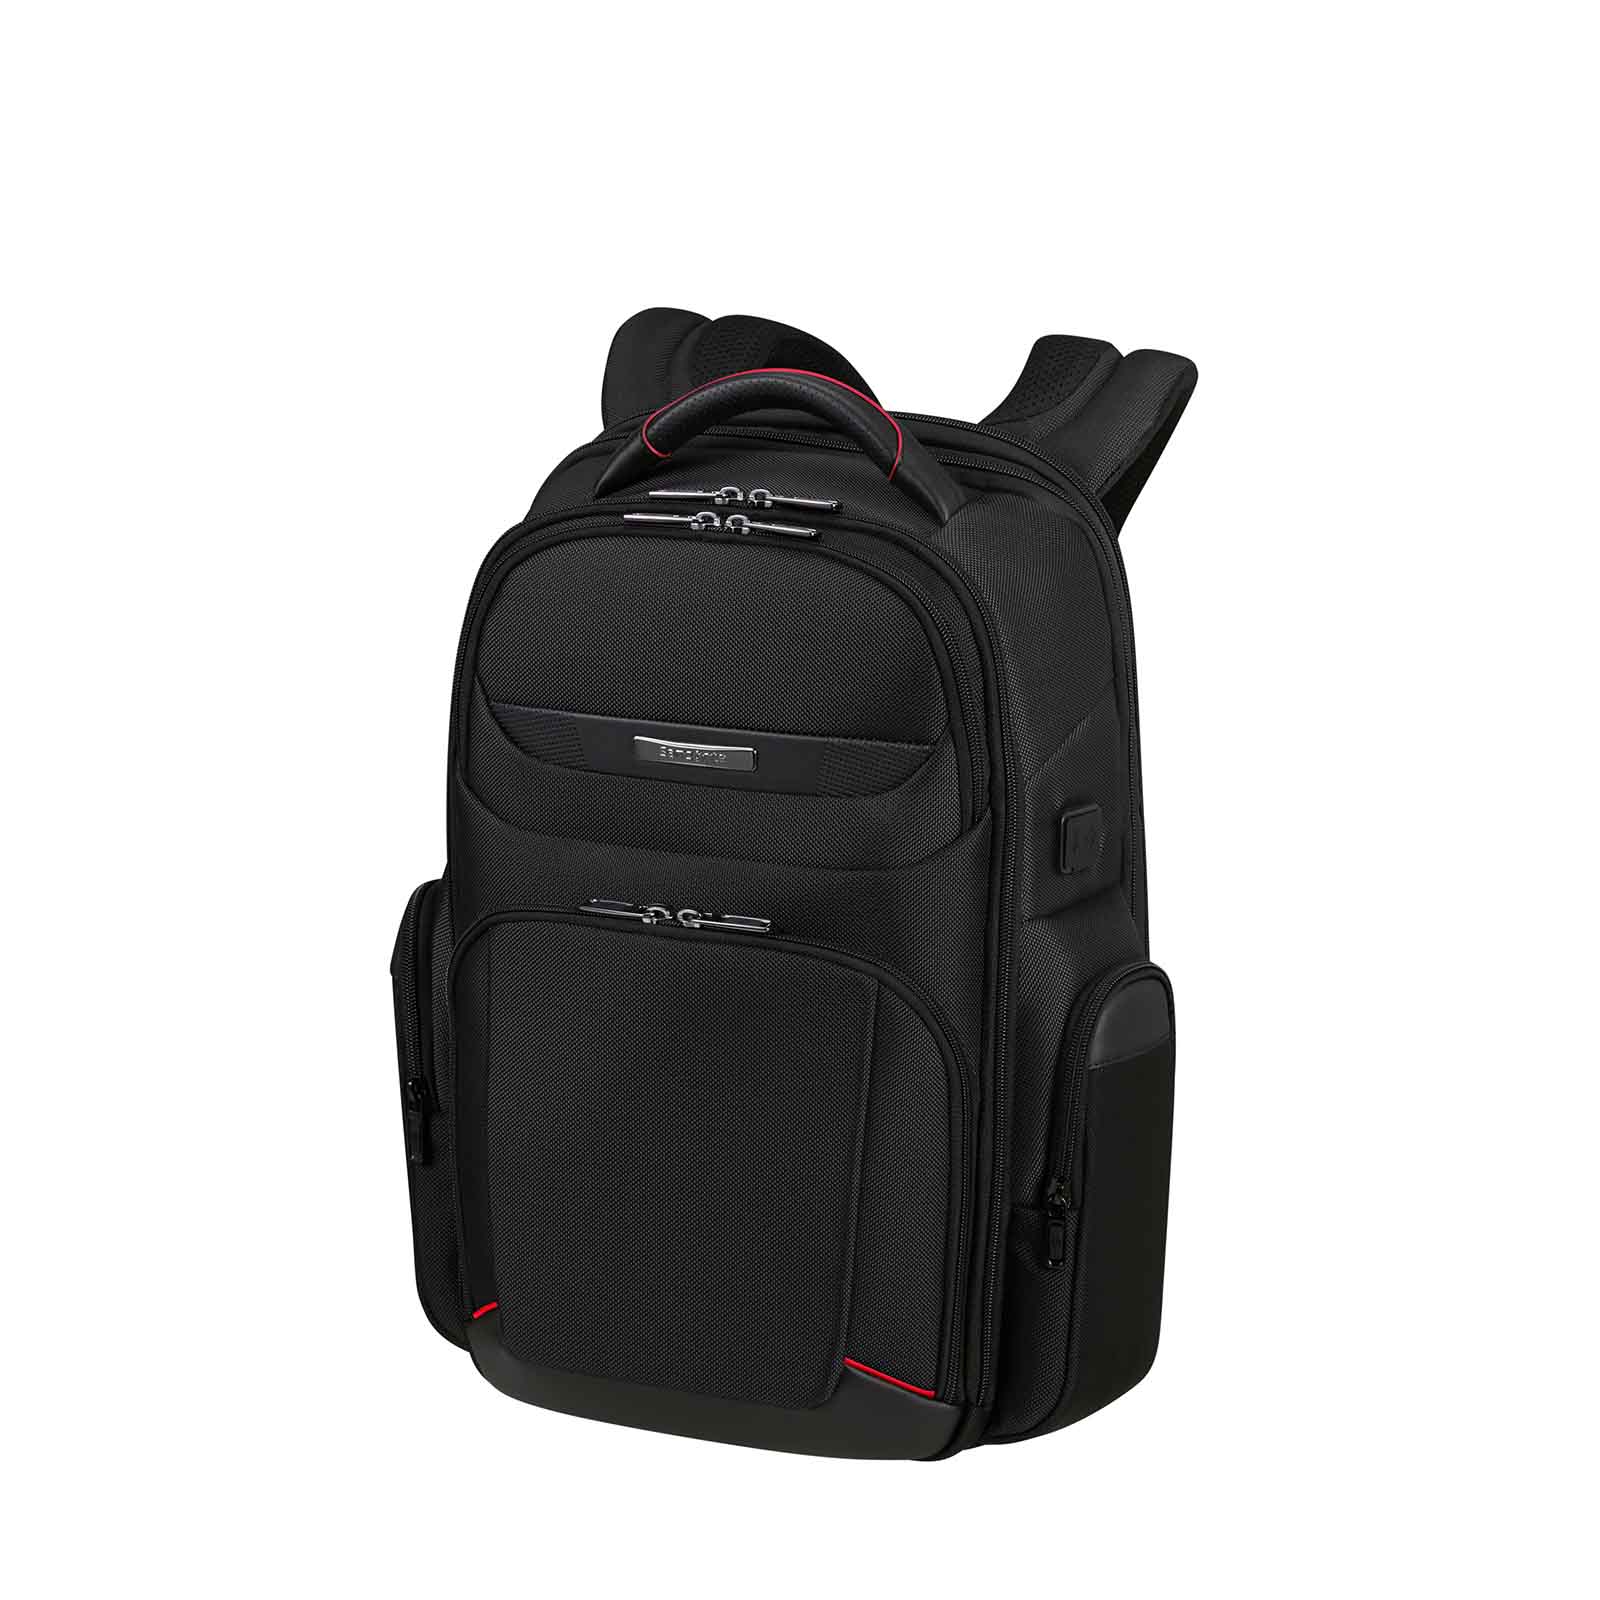 Samsonite-Pro-Dlx-6-Laptop-Backpack-15-Inch-Front-Angle